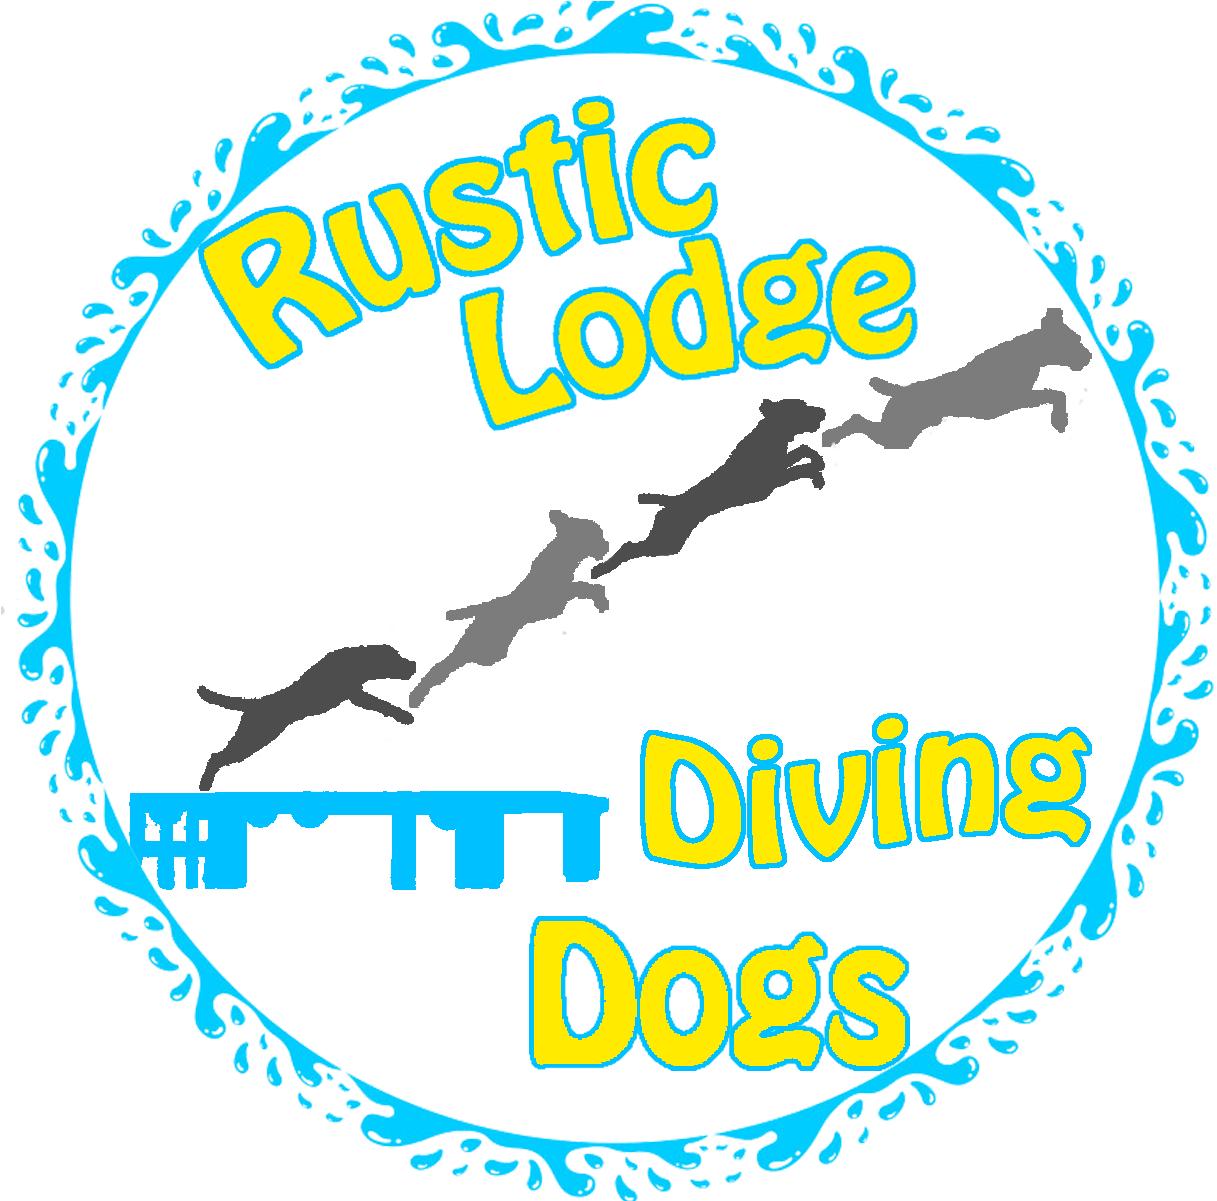 Rustic Lodge Diving Dogs Logo PNG